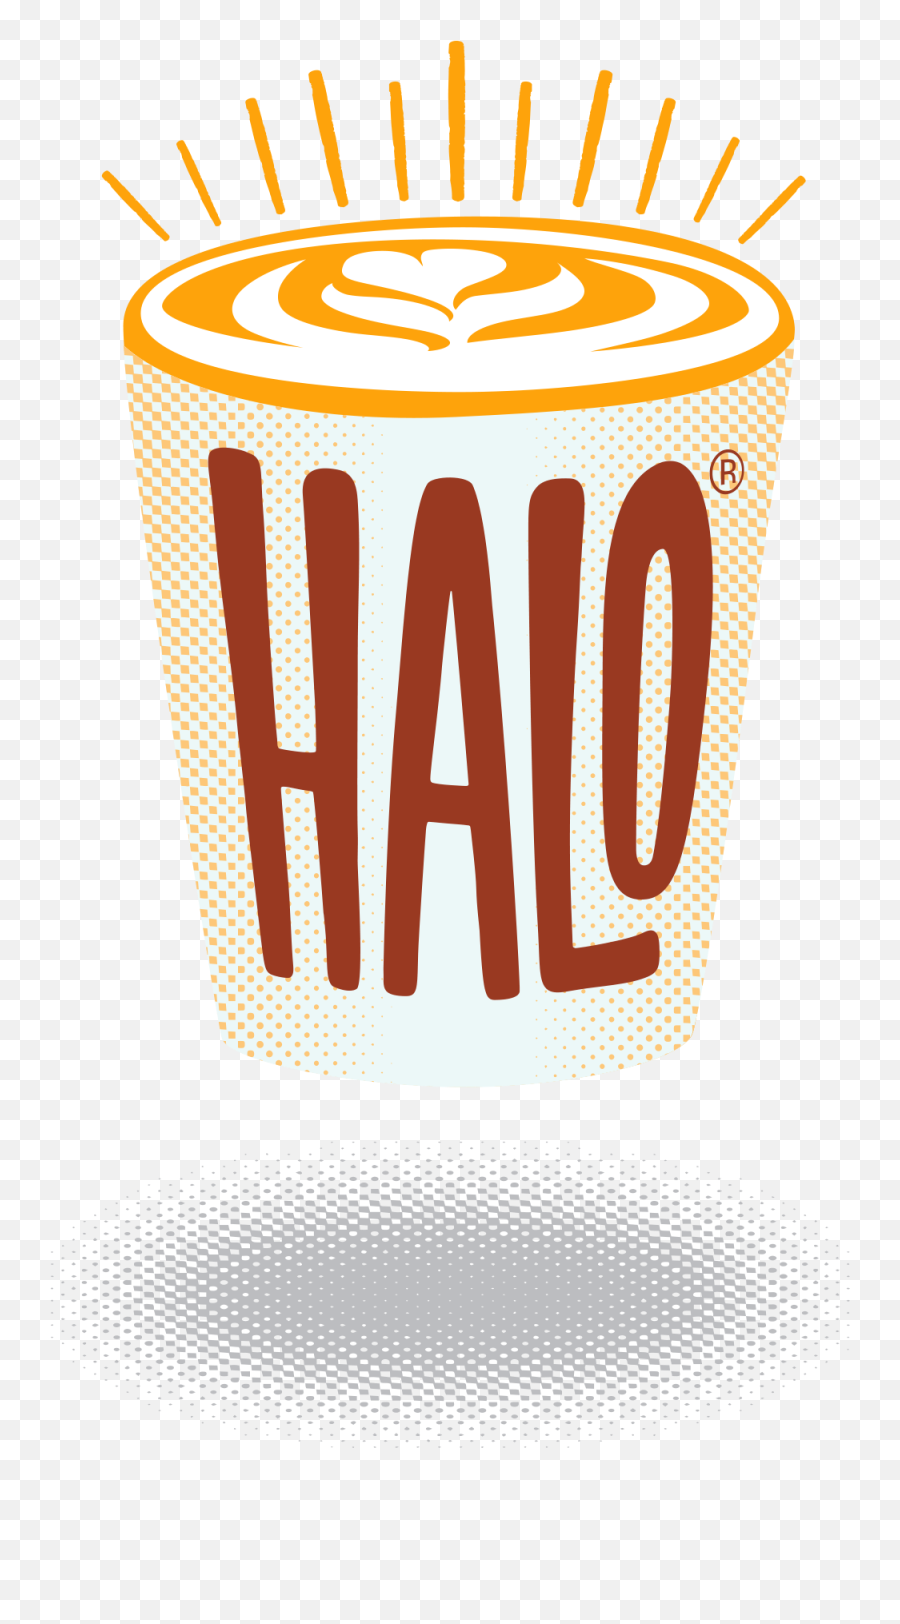 Find Your Nearest Halo Coffee Café Nz - Halo Coffee Nz Png,Halo 5 Forge Icon